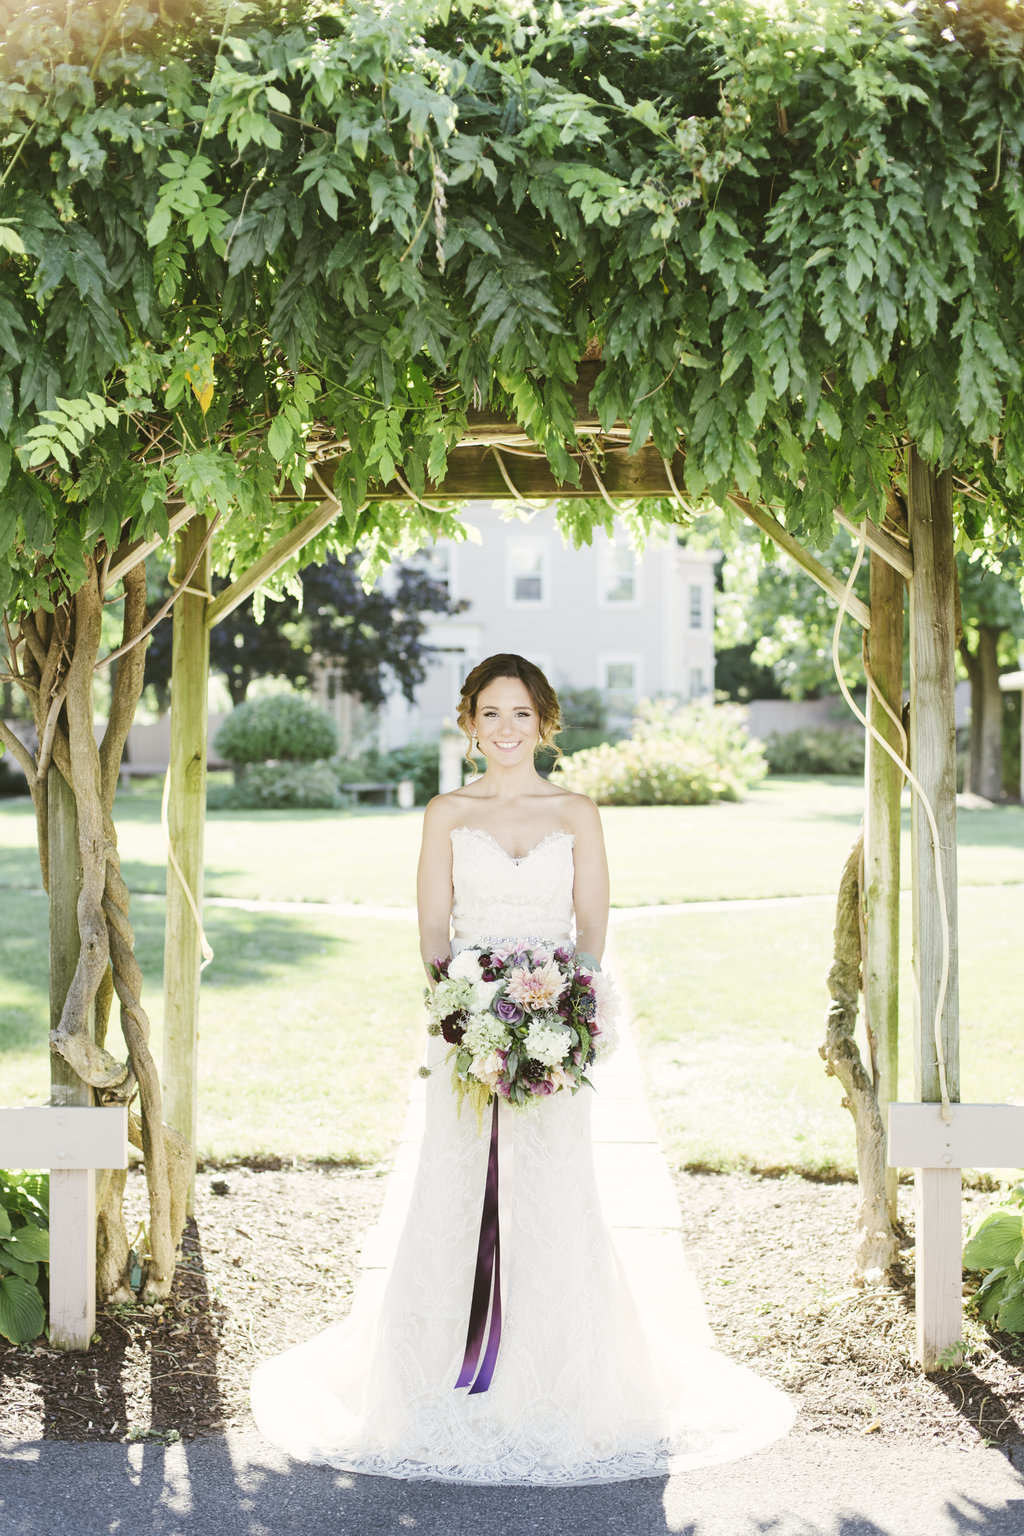 Monica-Relyea-Events-Alicia-King-Photography-Delamater-Inn-Beekman-Arms-Wedding-Rhinebeck-New-York-Hudson-Valley129